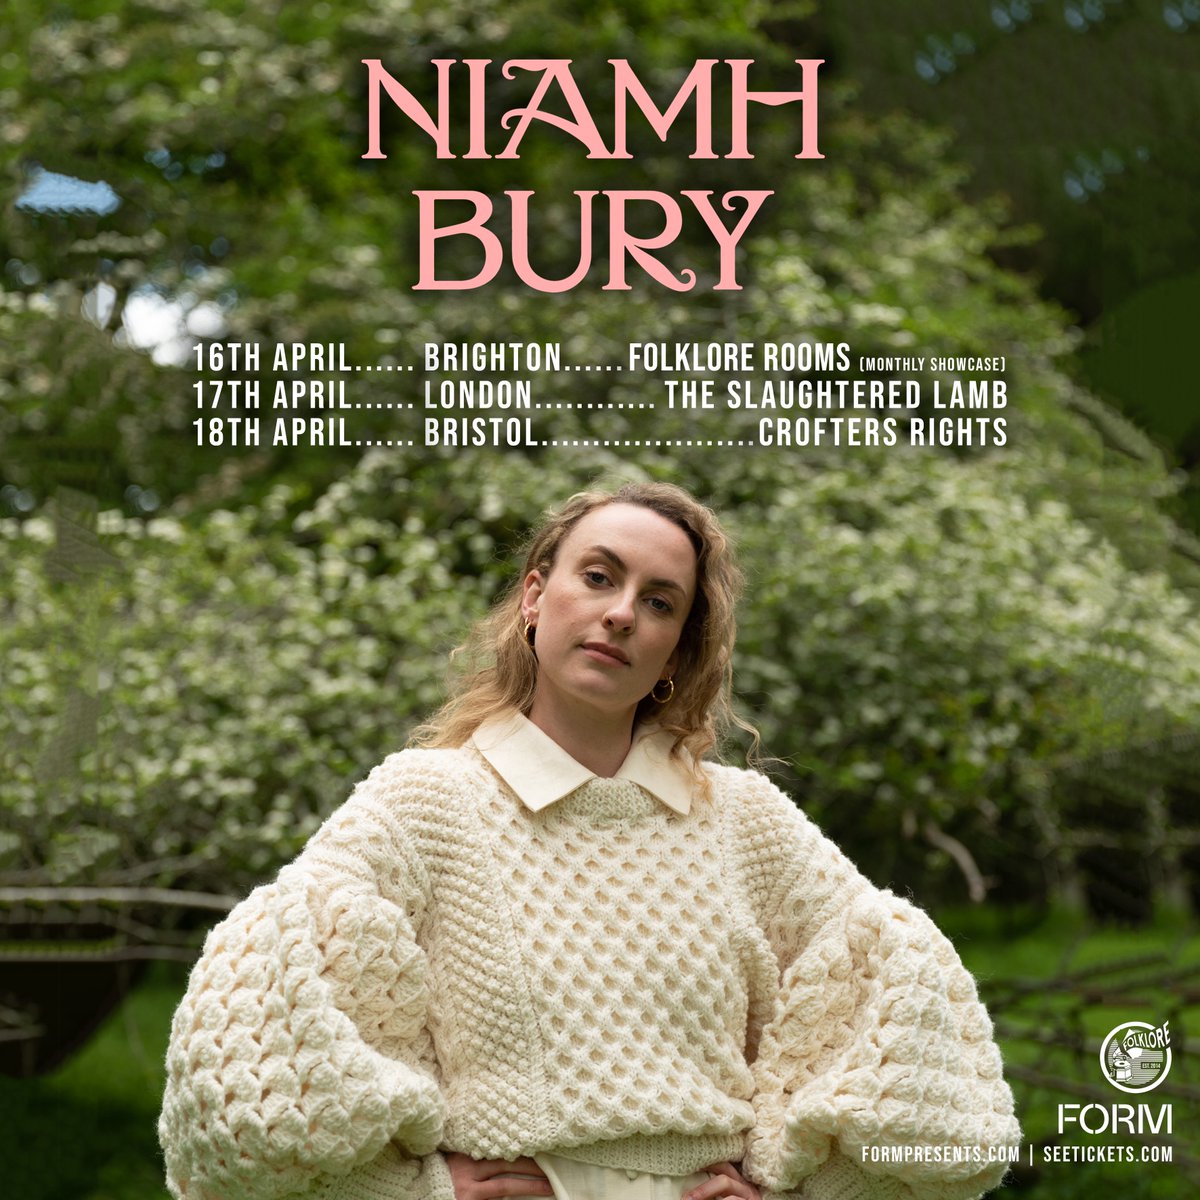 We’re very excited to welcome one of the most exciting new voices in the Irish folk scene @Niamh_Bury to Bristol and London in April! 🔥 🎟️ Tickets on-sale Friday 10am